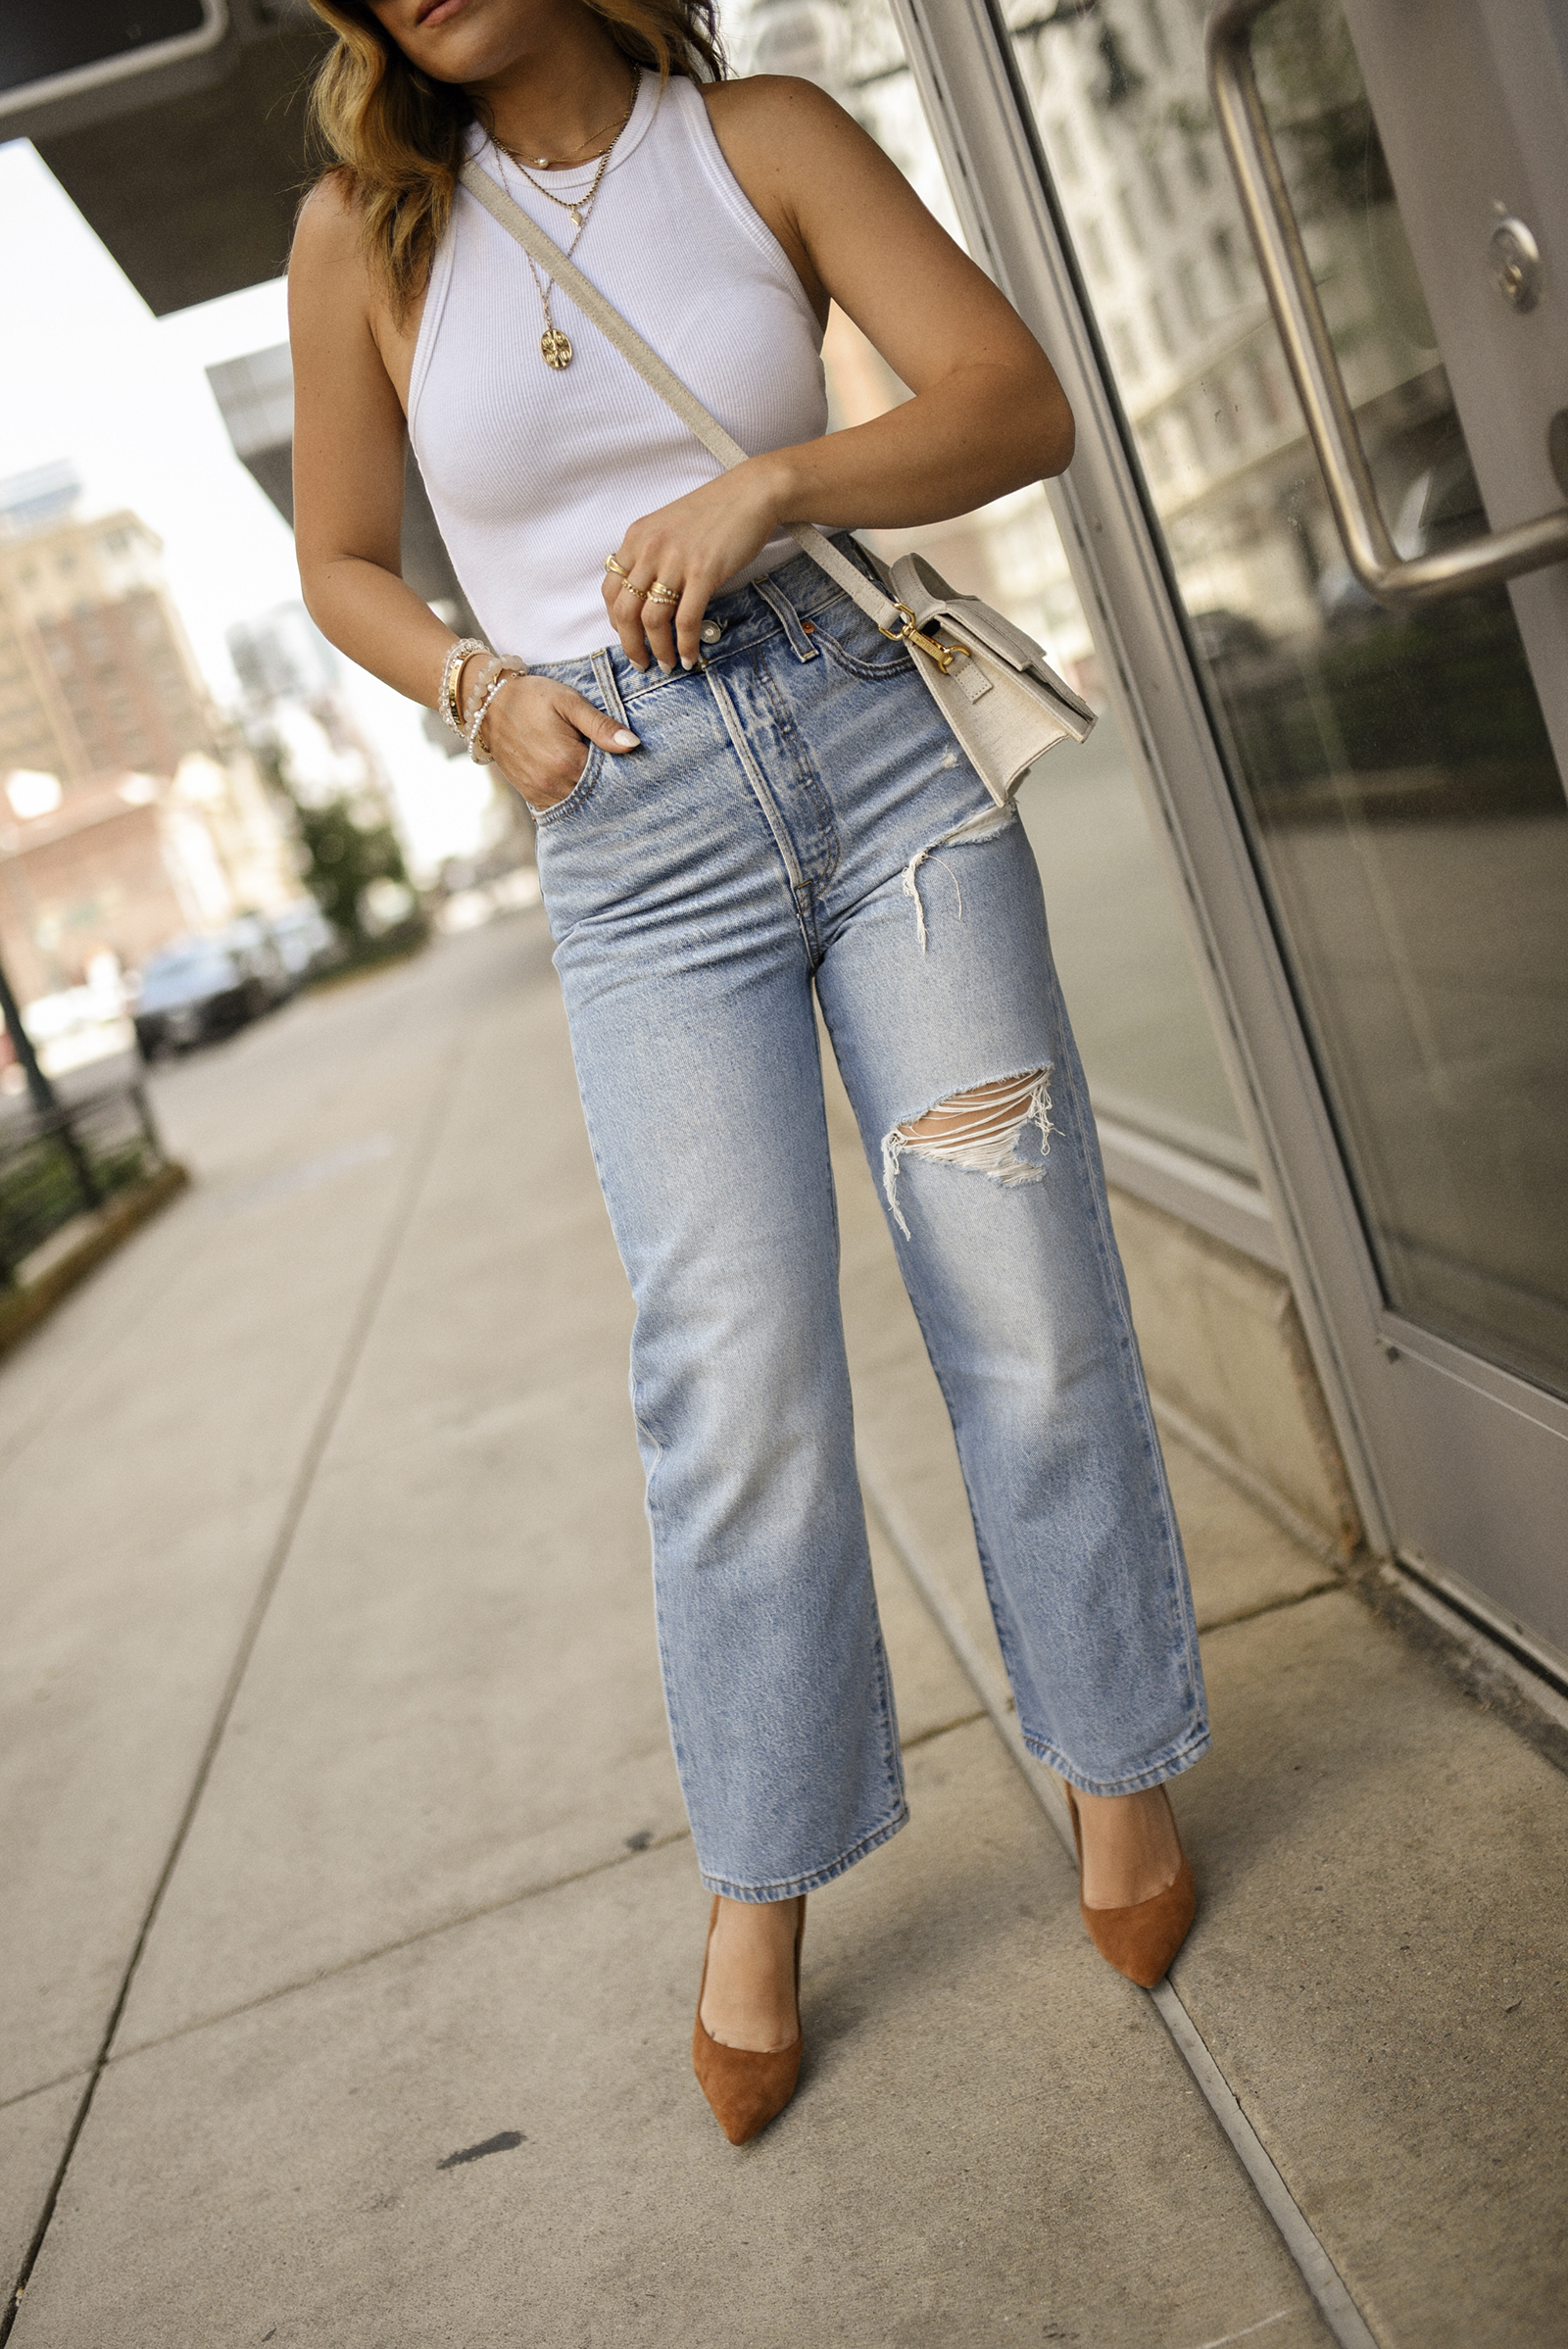 Carolina Hellal of Chic Talk wearing a white tank top via Abercrombie, Levi's straight leg jeans, steve madden suede pumps, Celine Sunglasses and Jacquemus bag. 